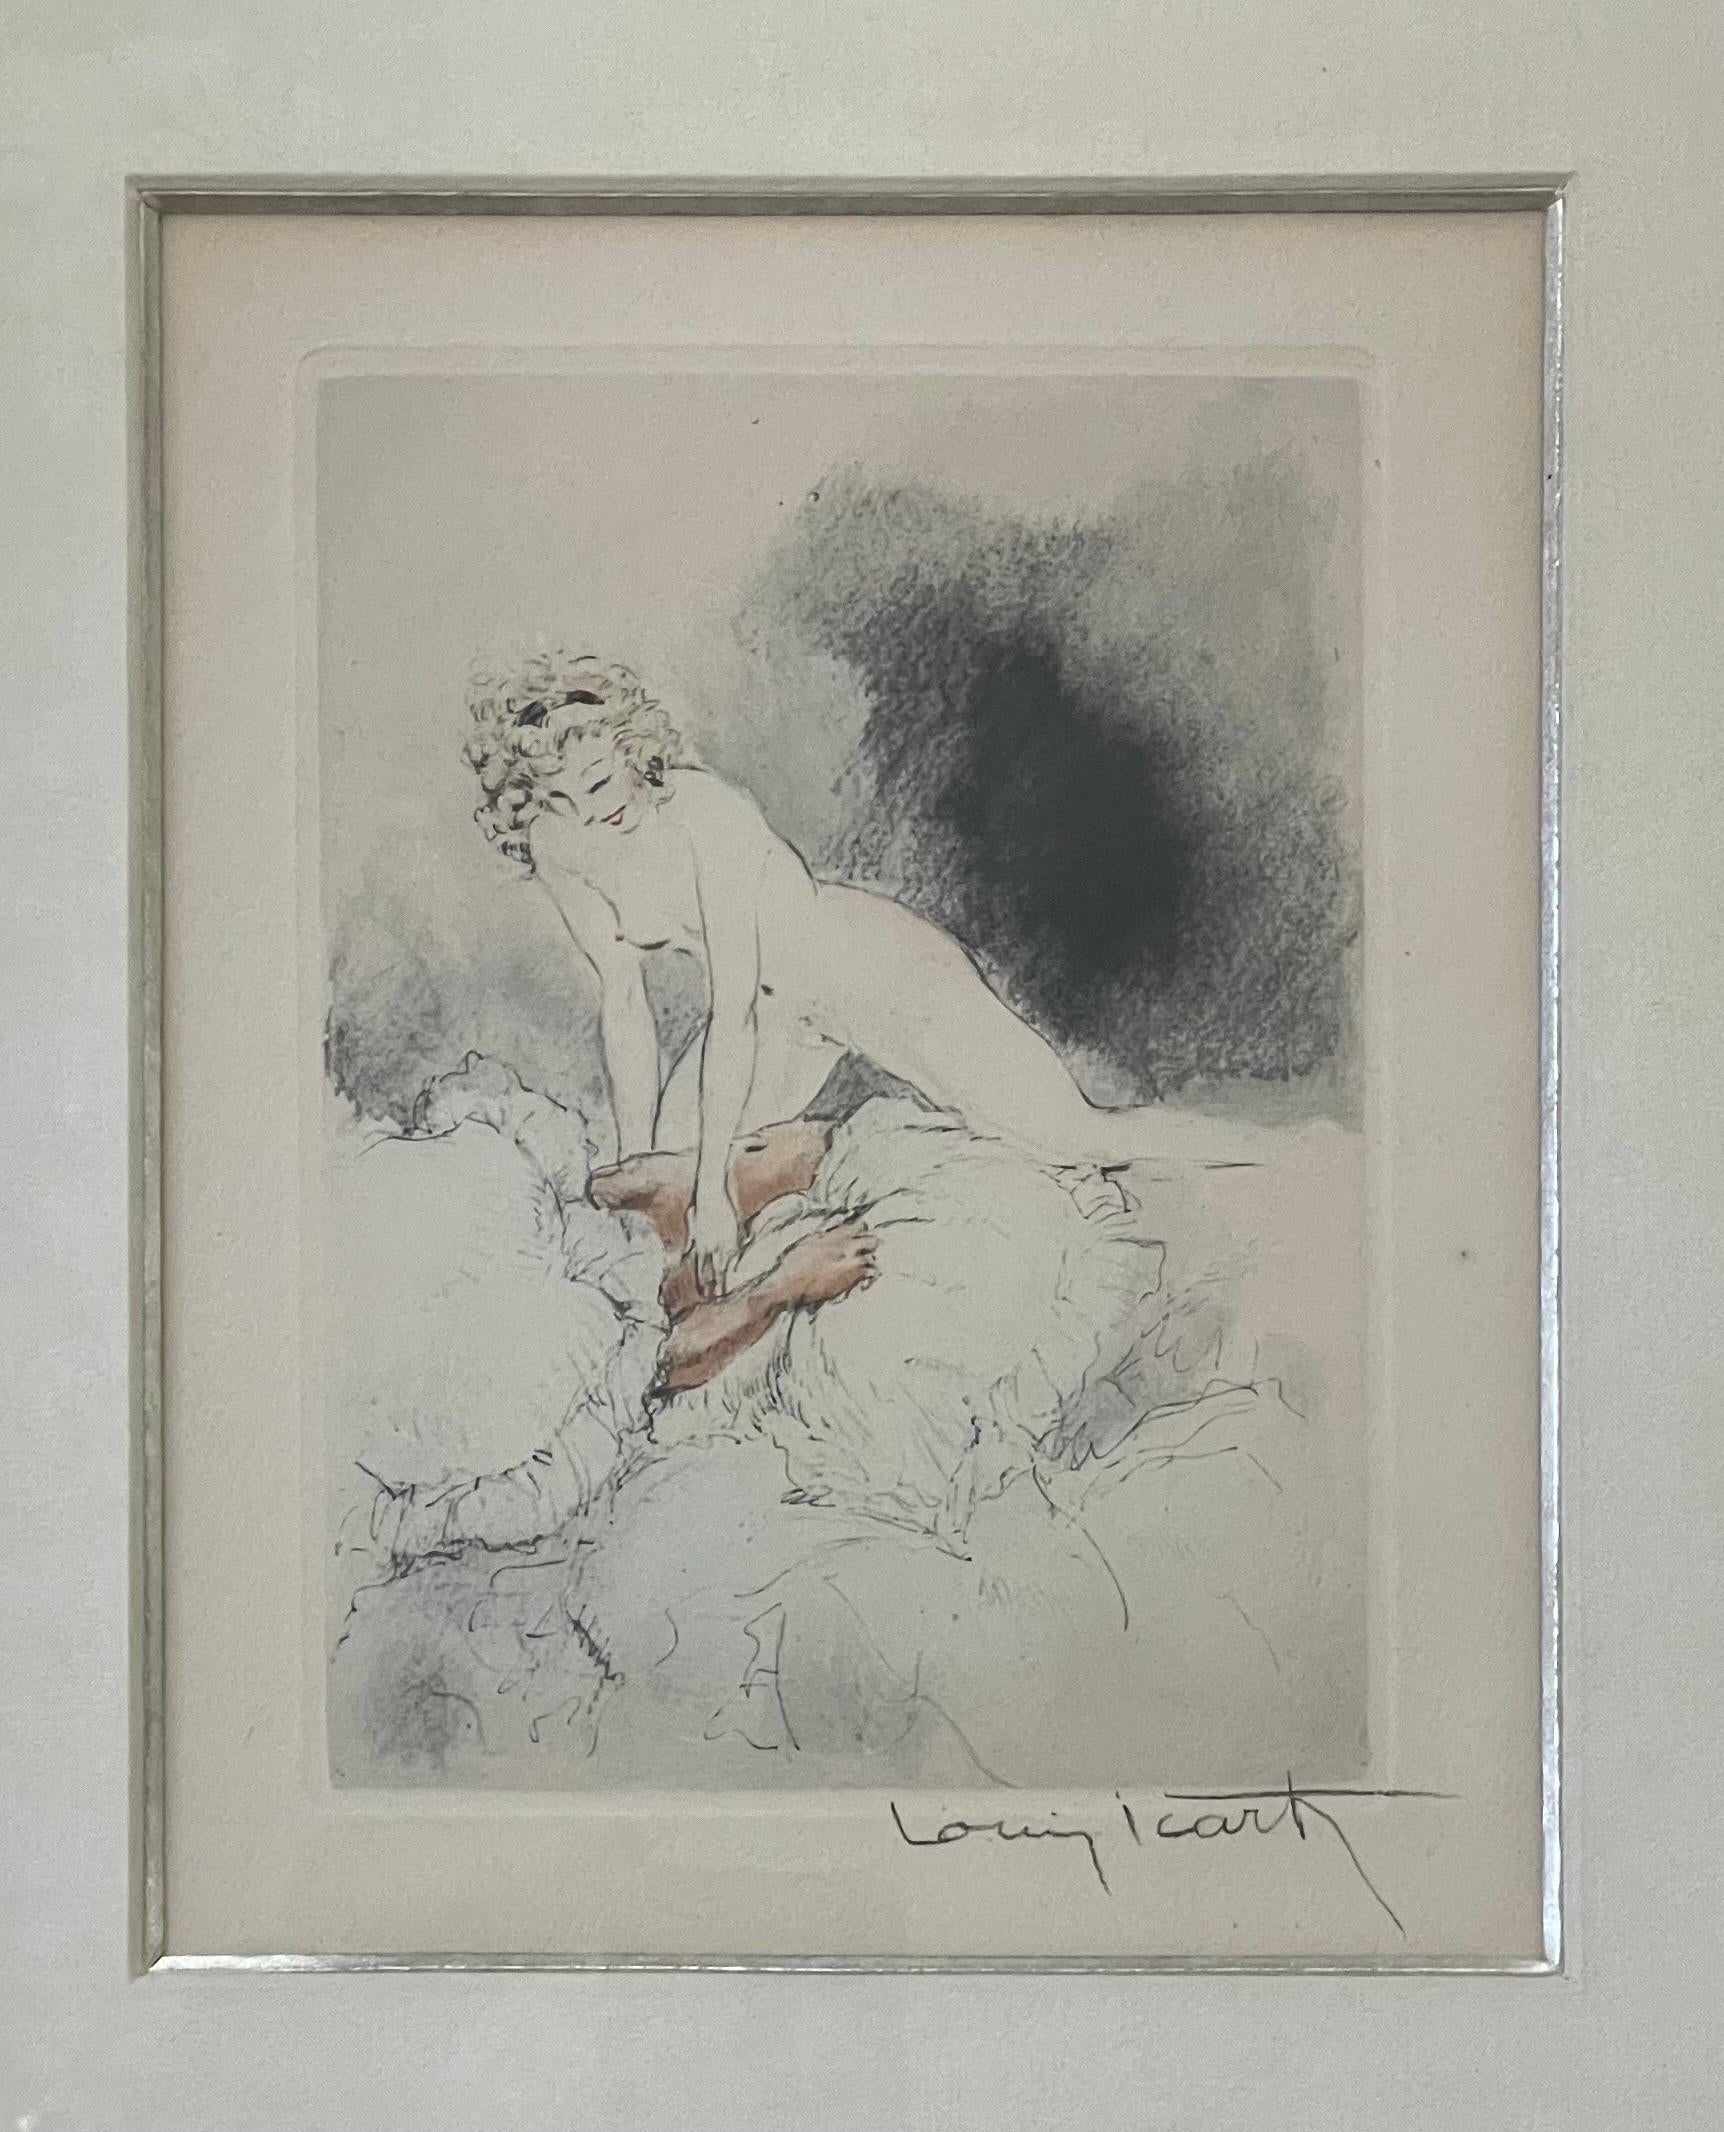 Erotica Etching by Louis Icart from the 